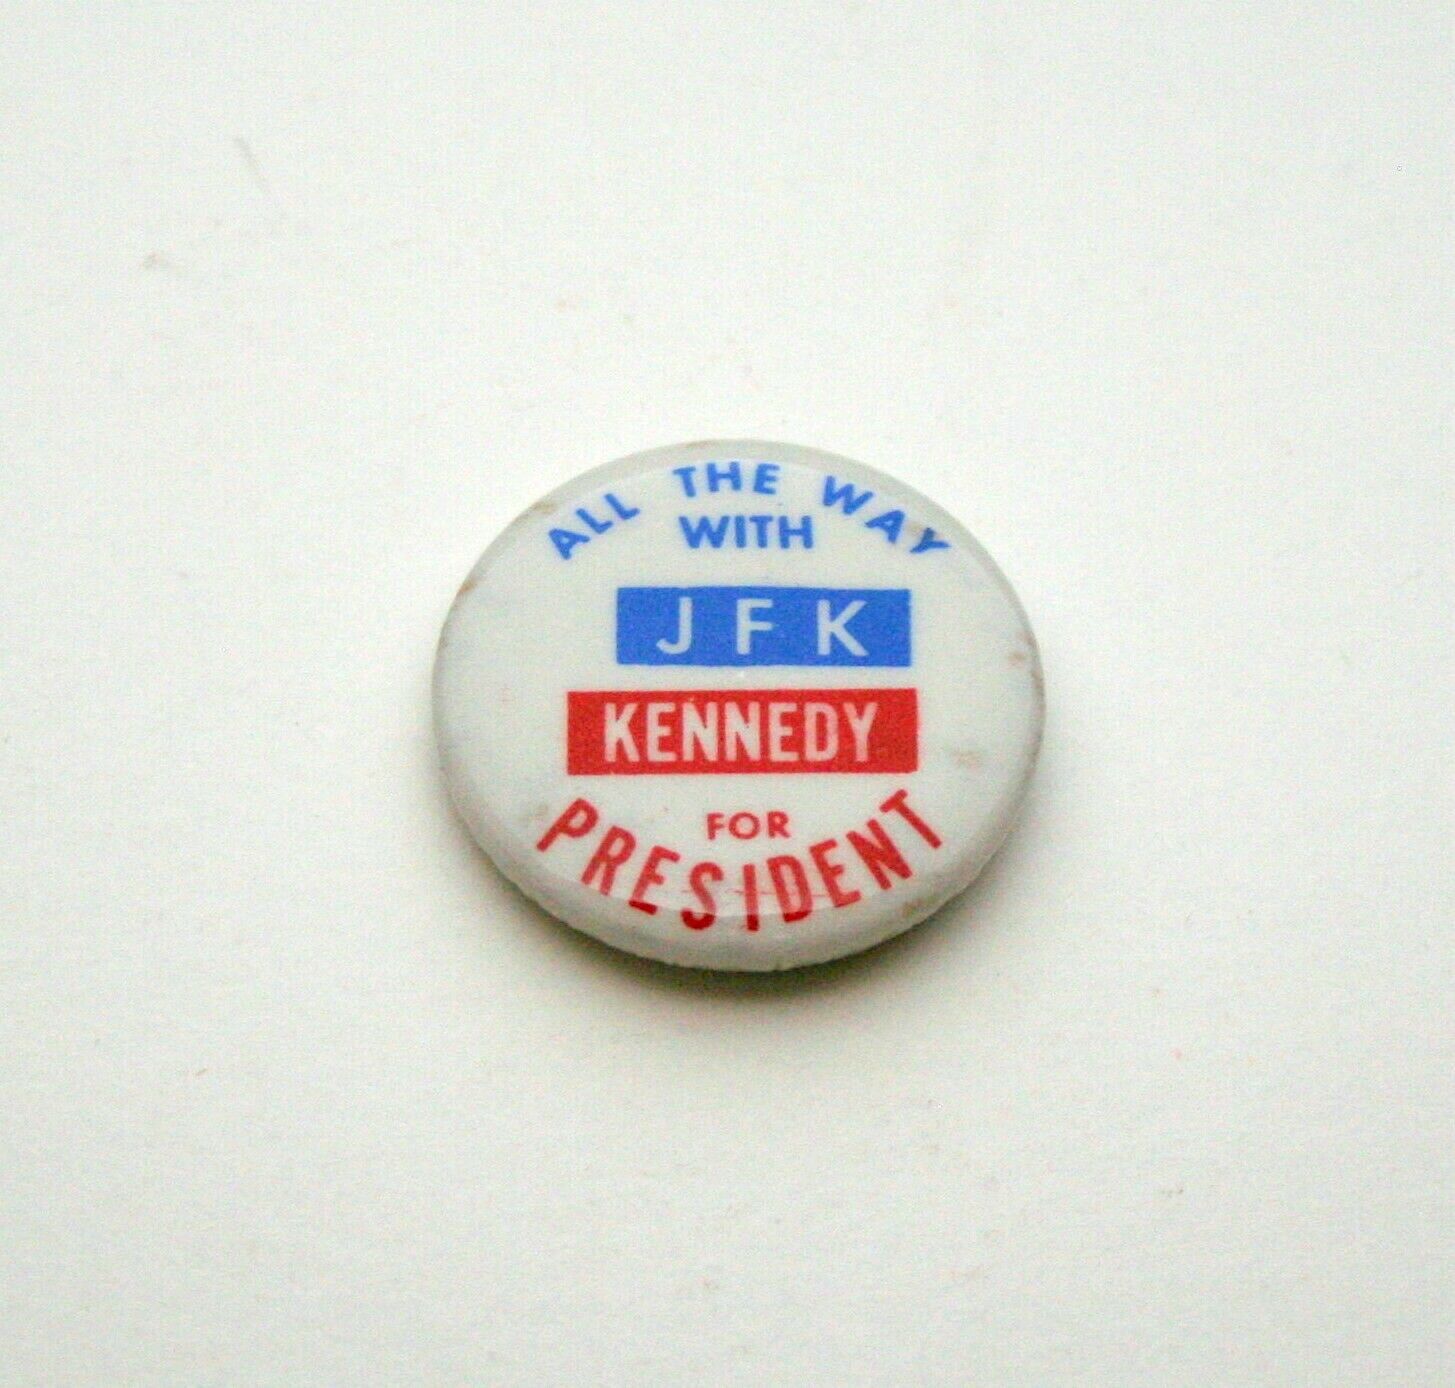 All The Way with JFK Kennedy for President Campaign Political Pin Button NOS